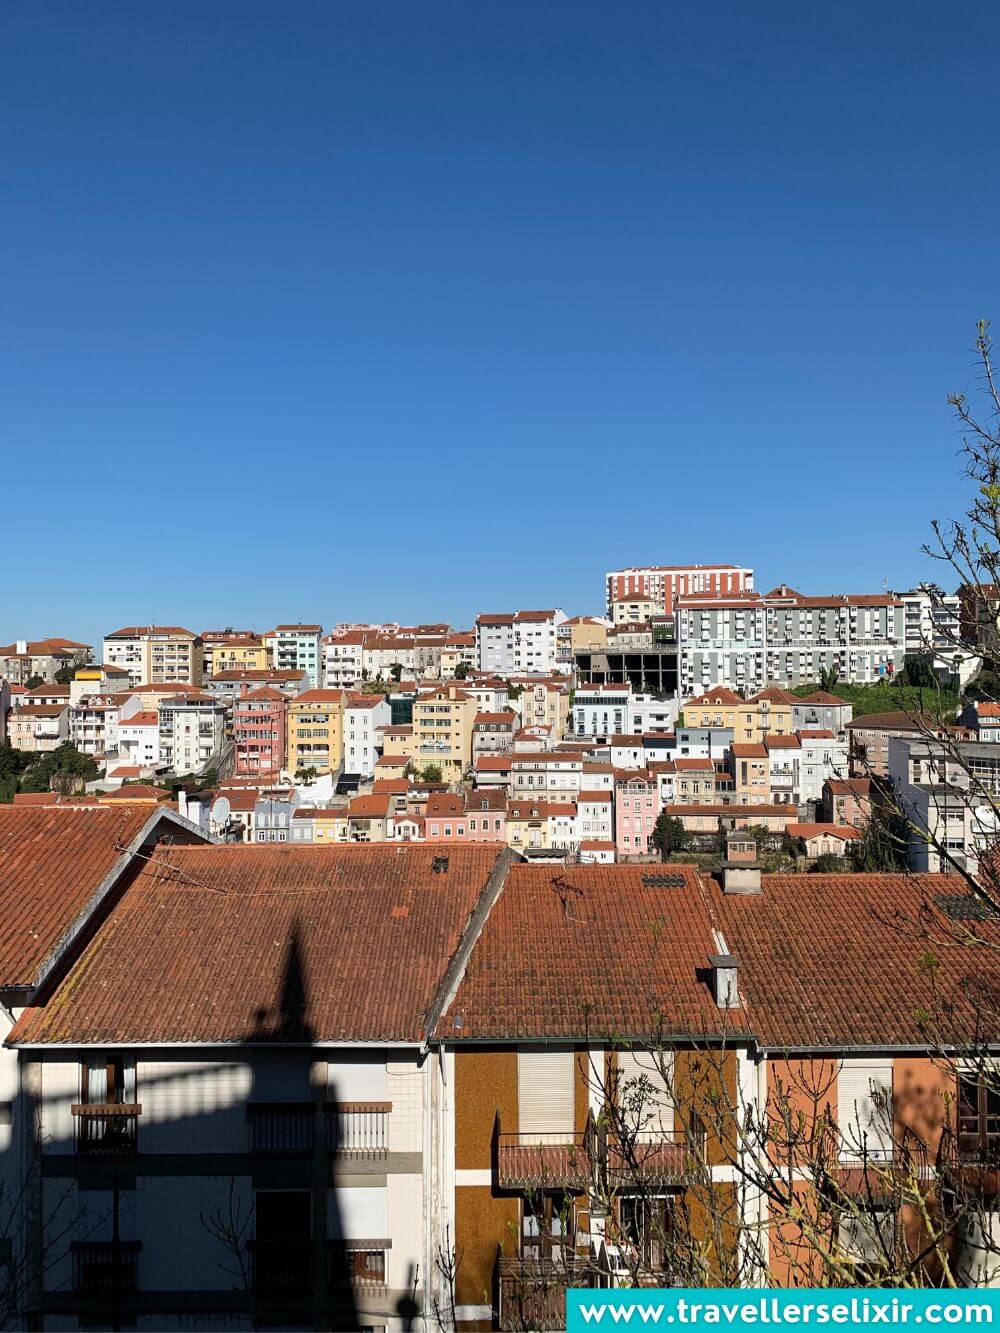 View from the Alta area of Coimbra.